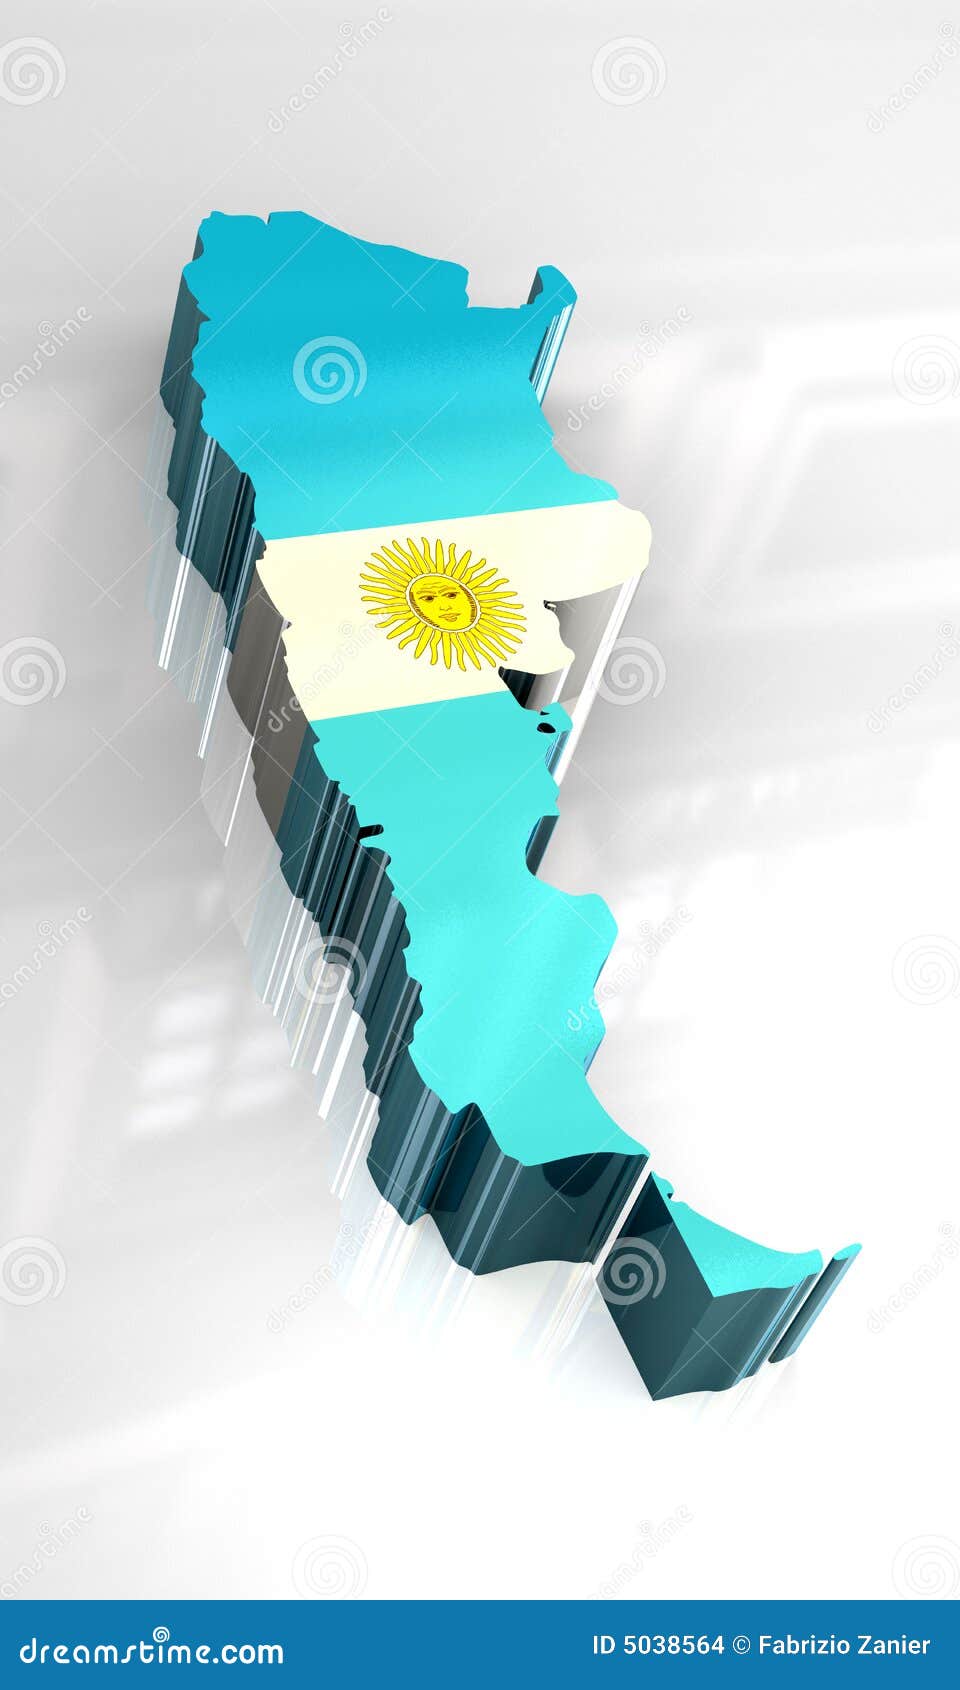 clipart map of argentina - photo #19